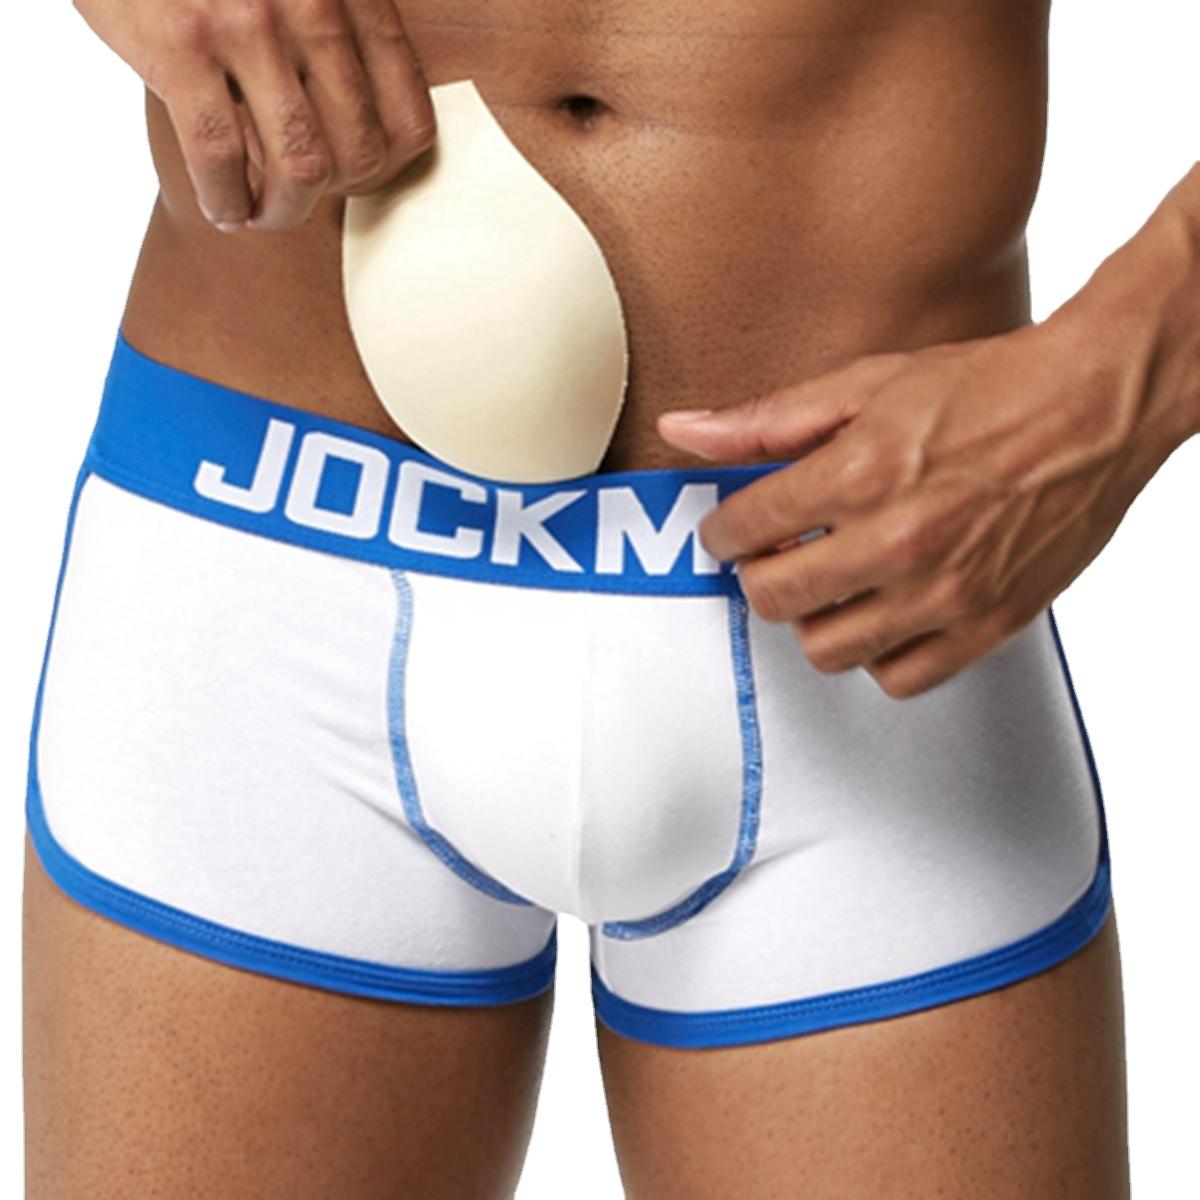 Boxer JOCKMAIL Men's Cotton Underwear Front and Back with Cups Boxers Comfortable Breathable Sports Trunks